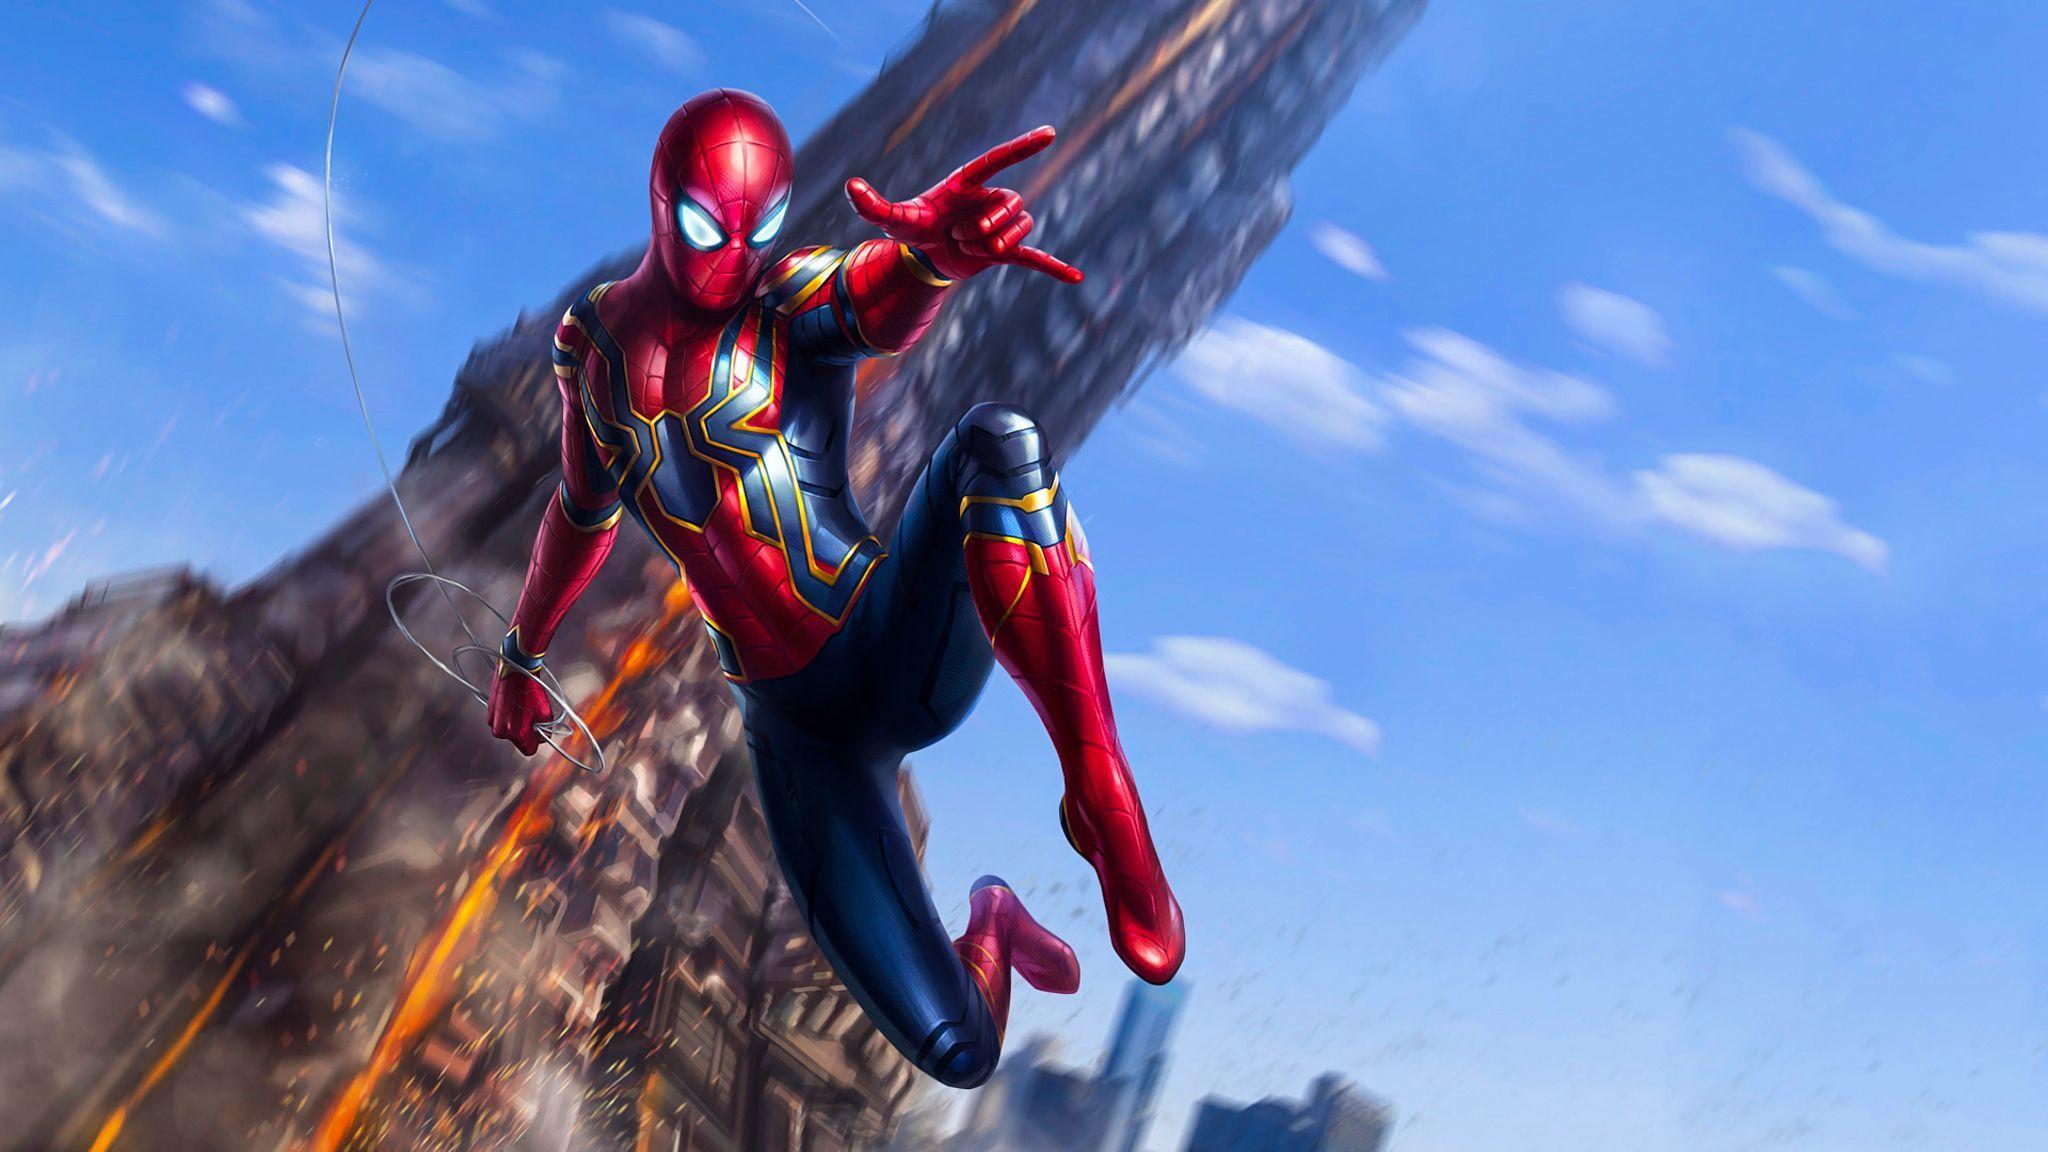 Iron Spider Wallpapers  HD Wallpapers  ID 27903